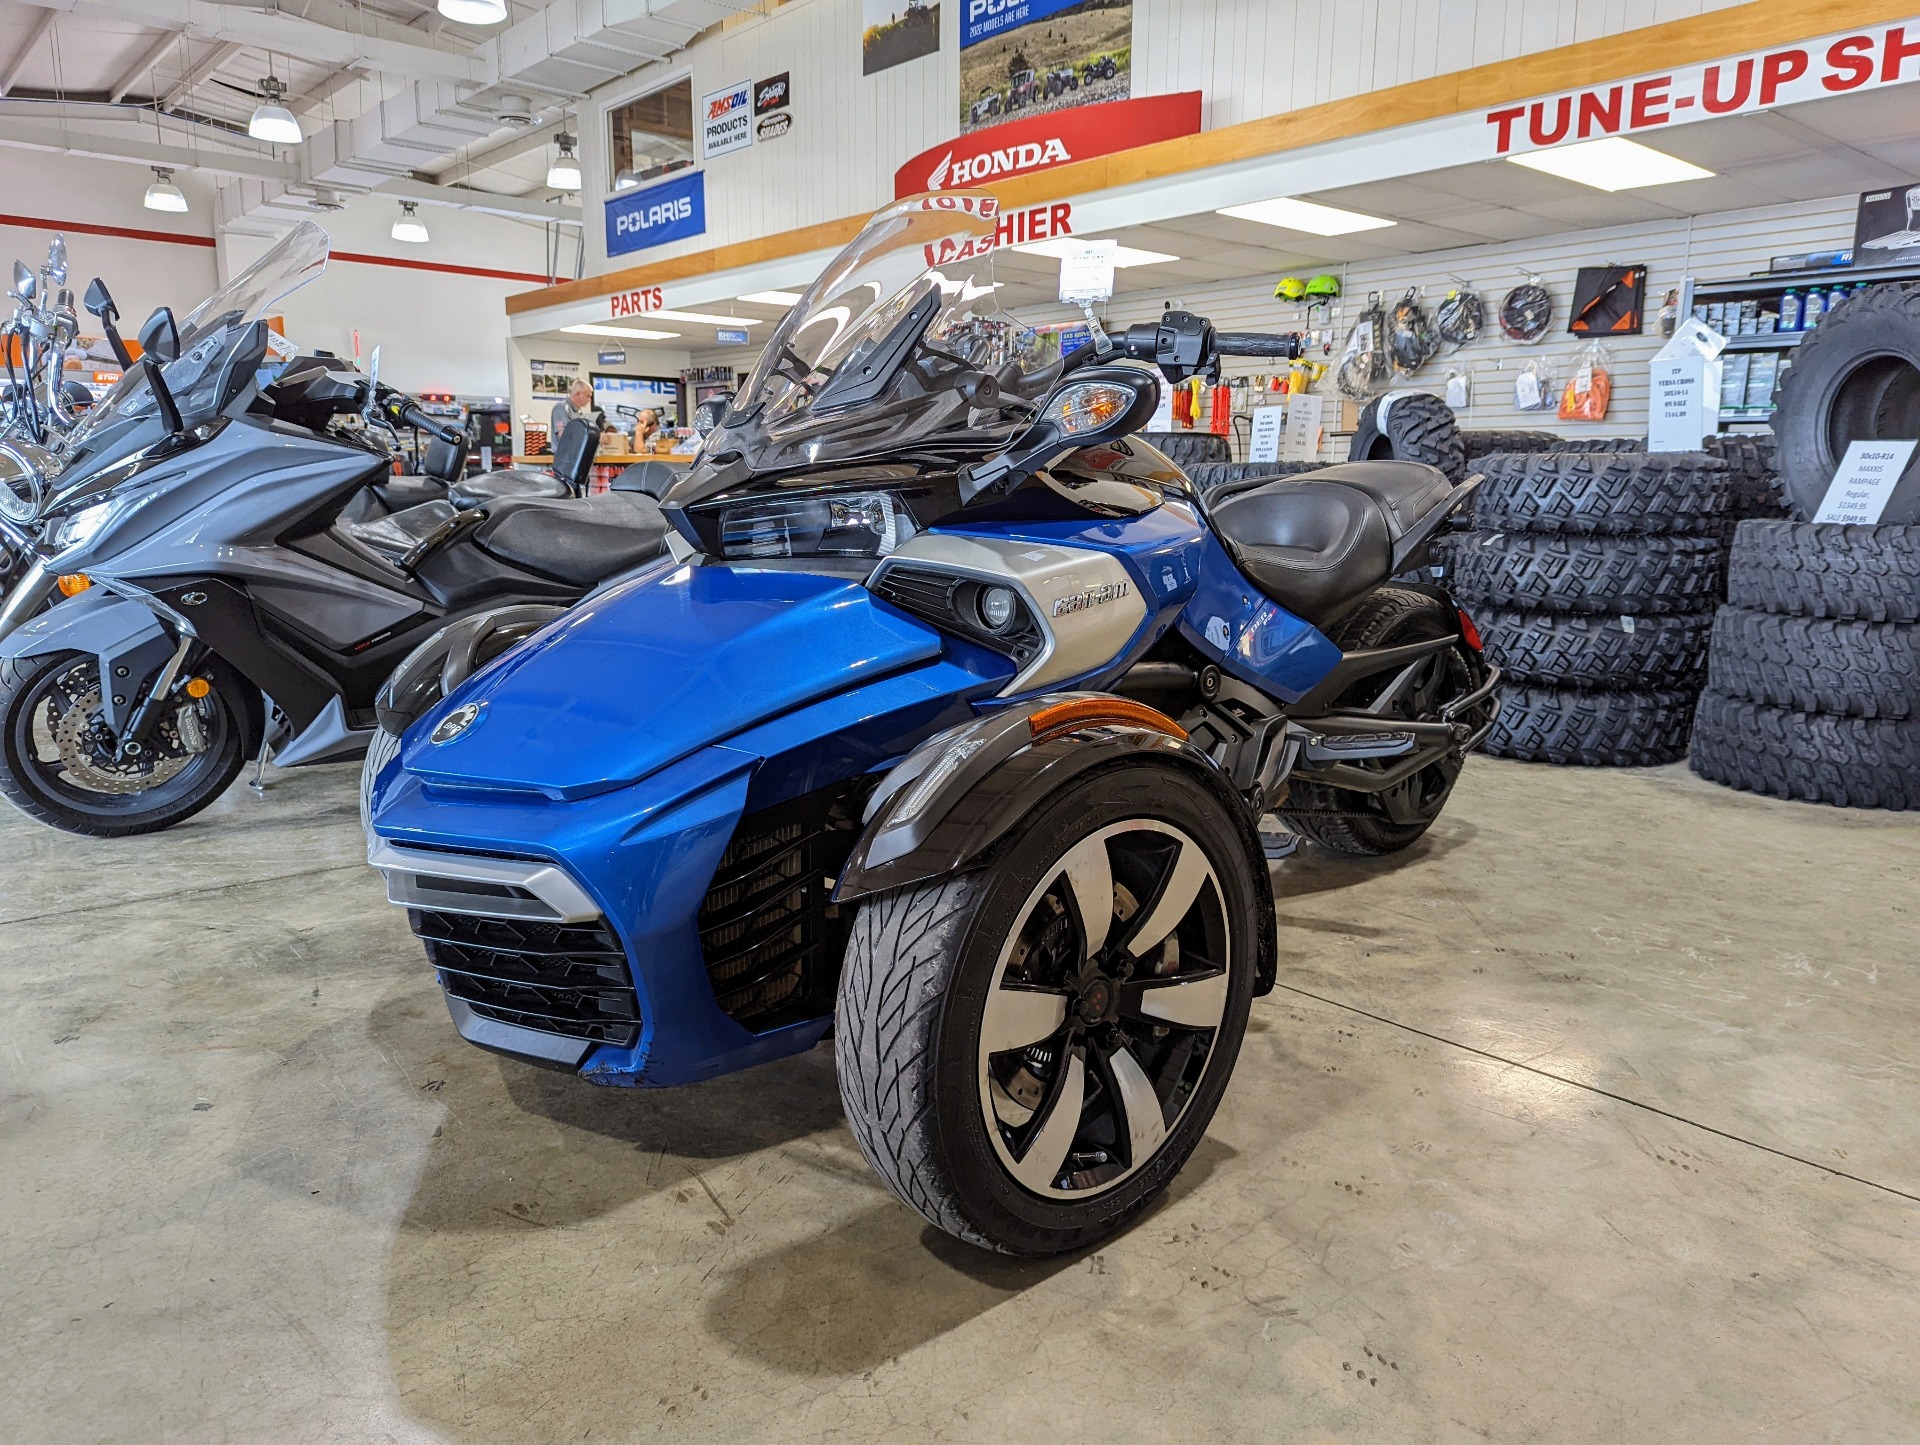 2017 Can-Am Spyder F3-S SE6 in Winchester, Tennessee - Photo 3